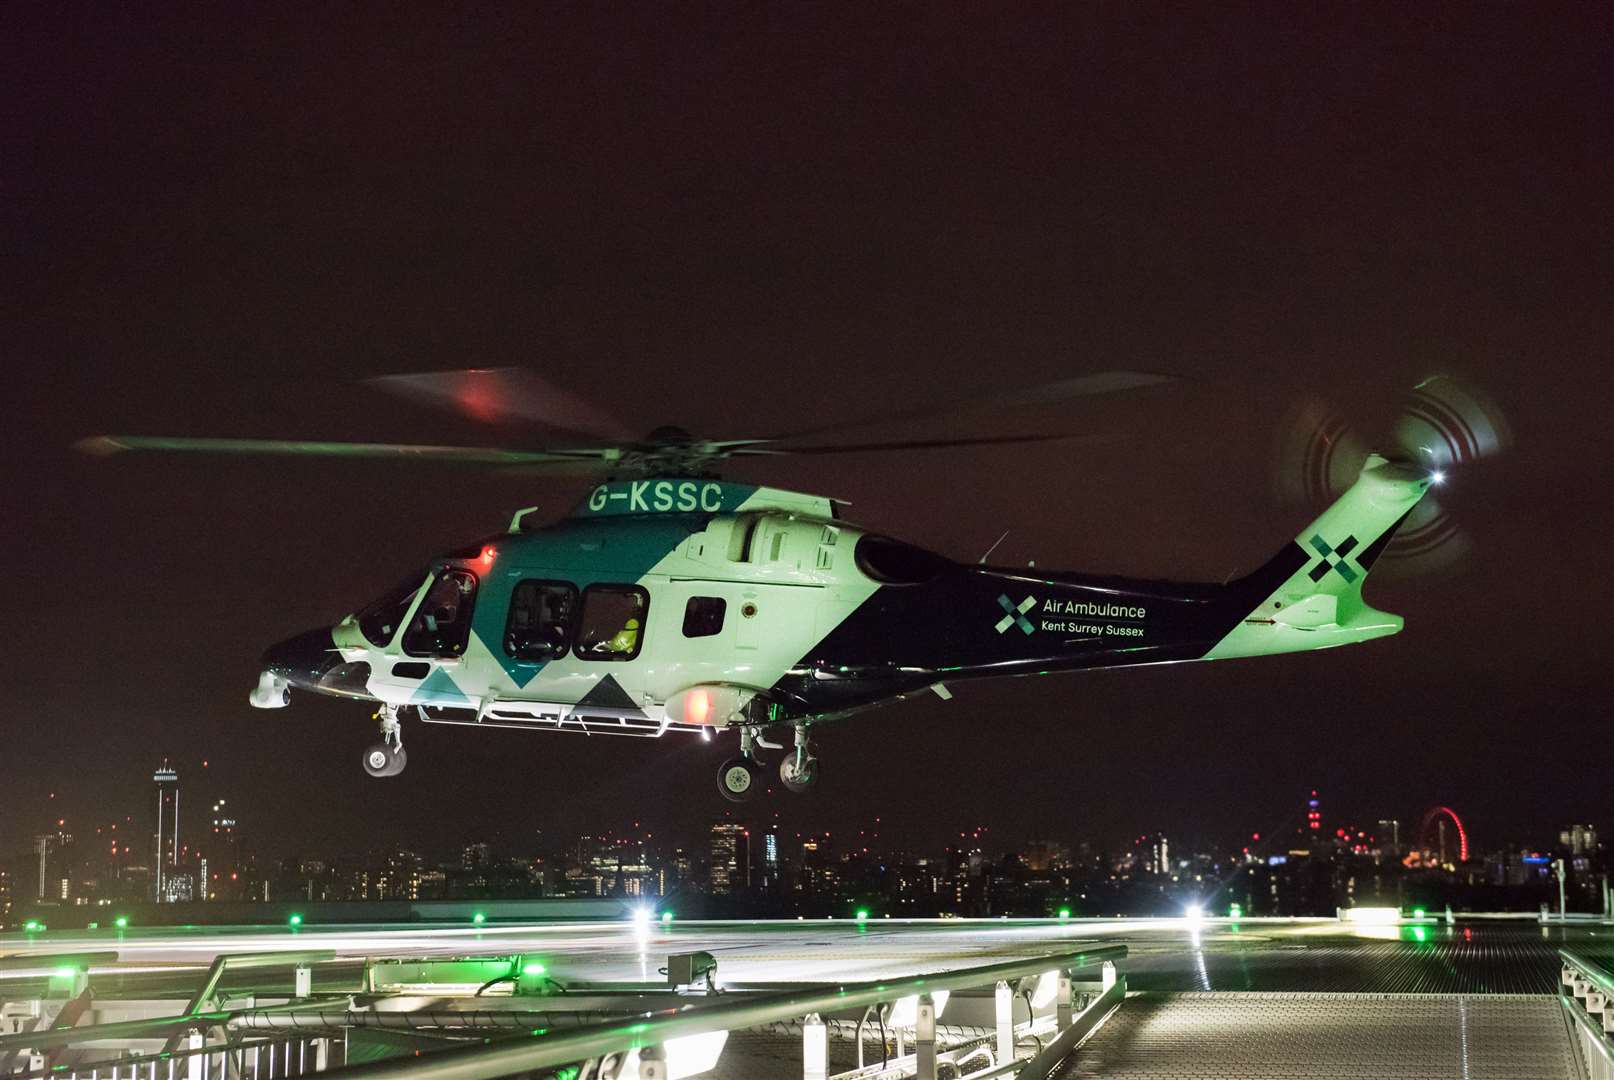 A night landing at King's College Hospital in London (24183143)